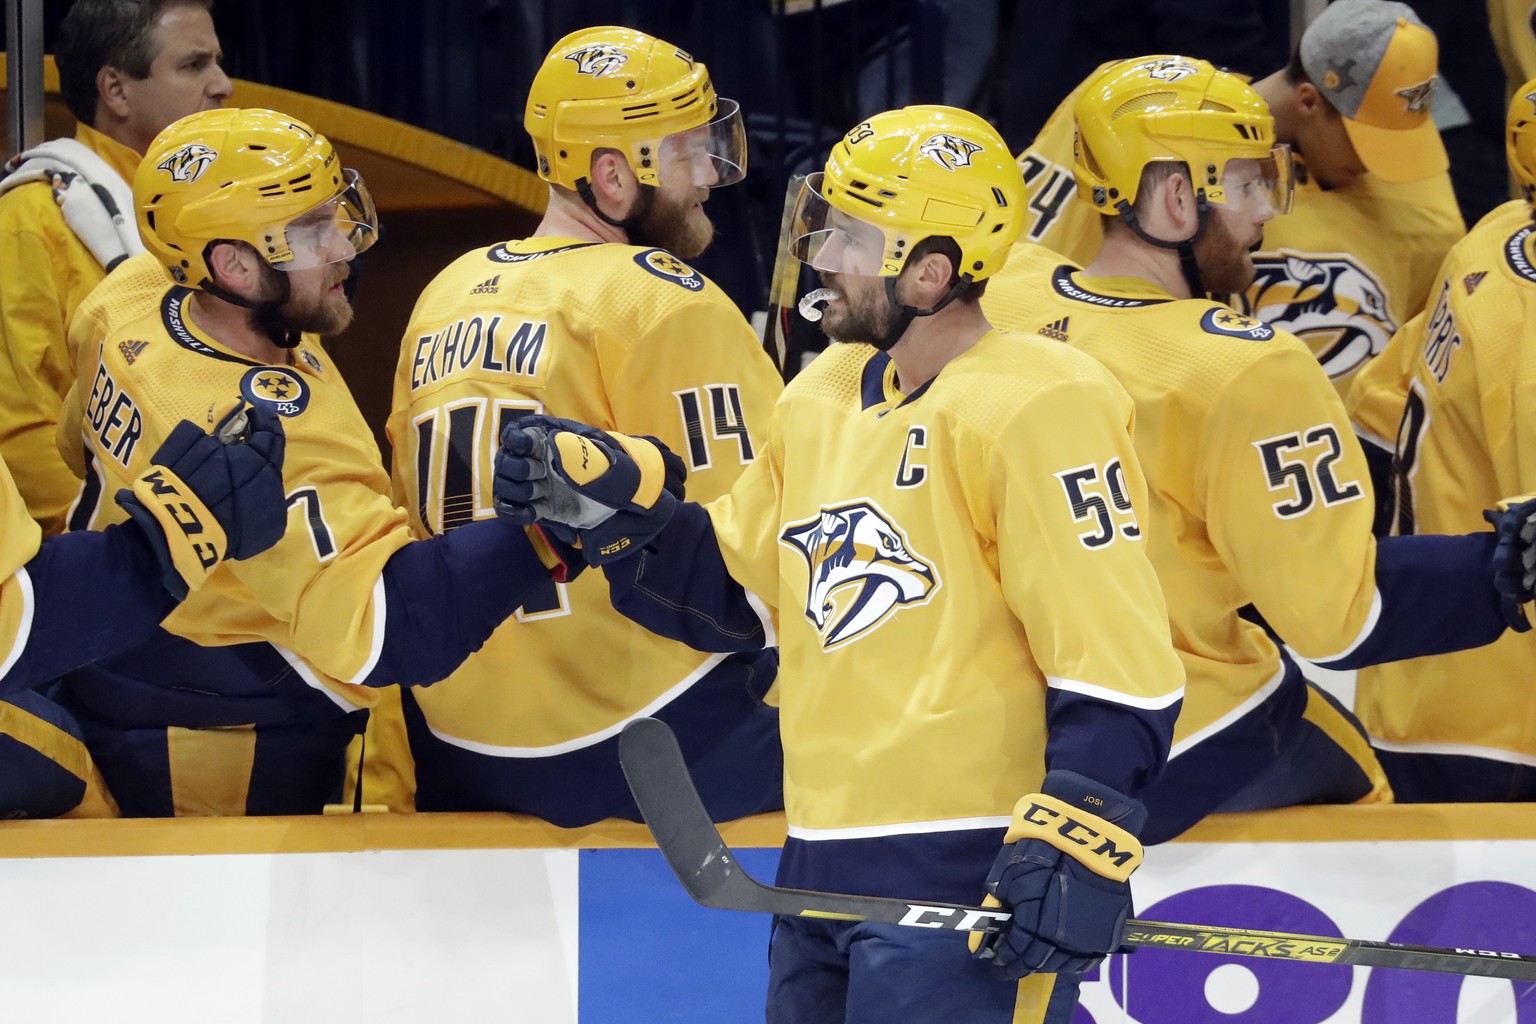 Nashville Predators defenseman Roman Josi (59), of Switzerland, is congratulated after scoring a goal against the San Jose Sharks during the first period of an NHL hockey game Tuesday, Oct. 8, 2019, i ...